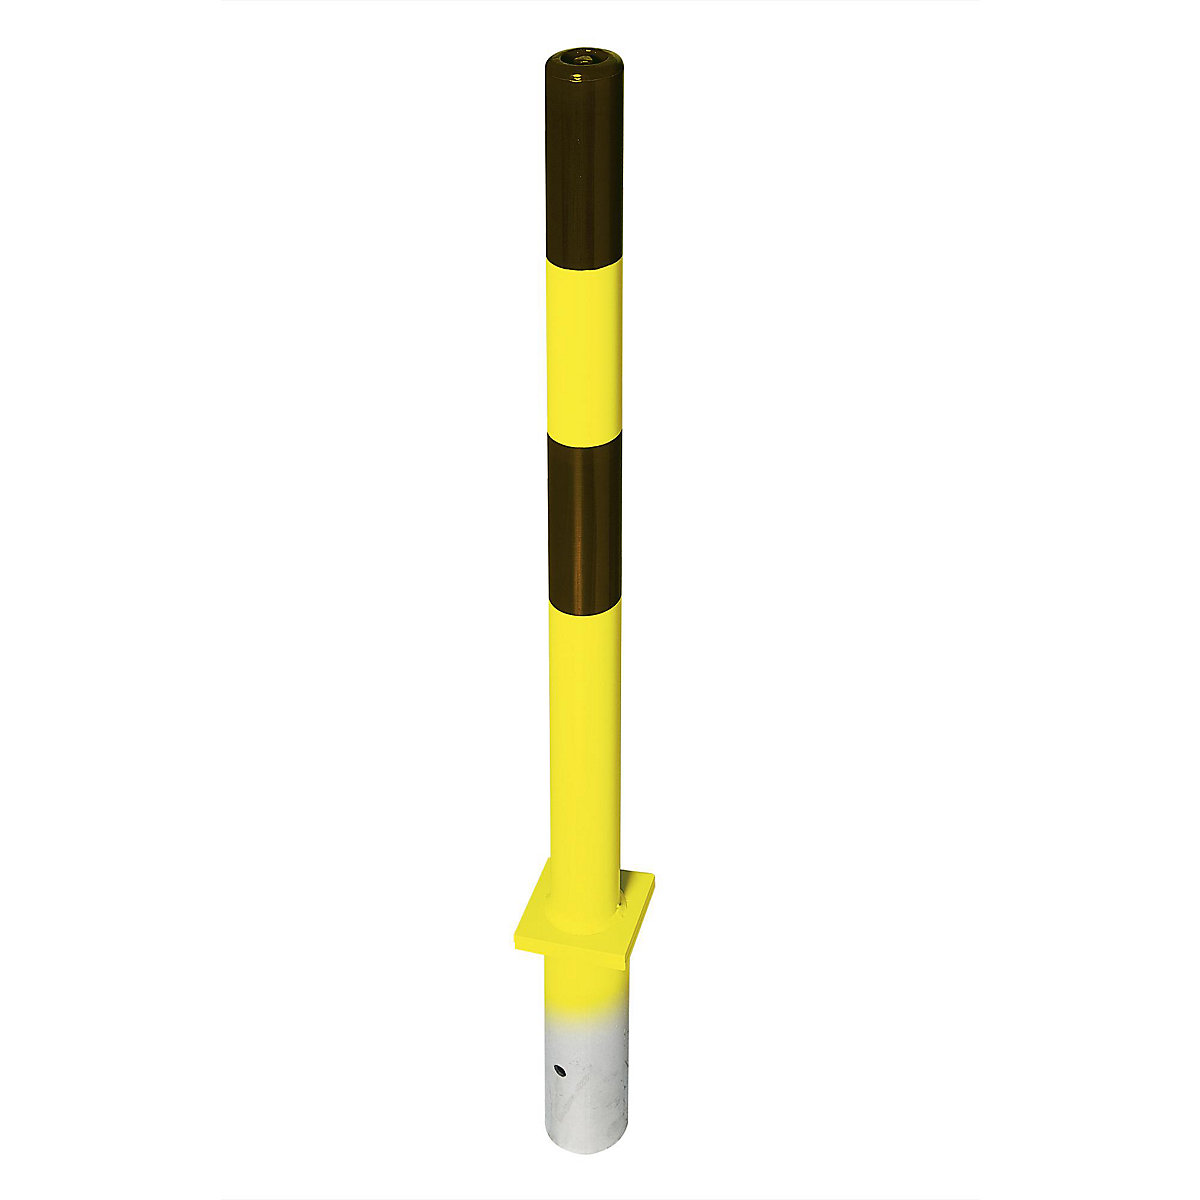 Barrier post made of steel, for setting in concrete, Ø 76 mm, black/yellow, 1 chain eyelet-4